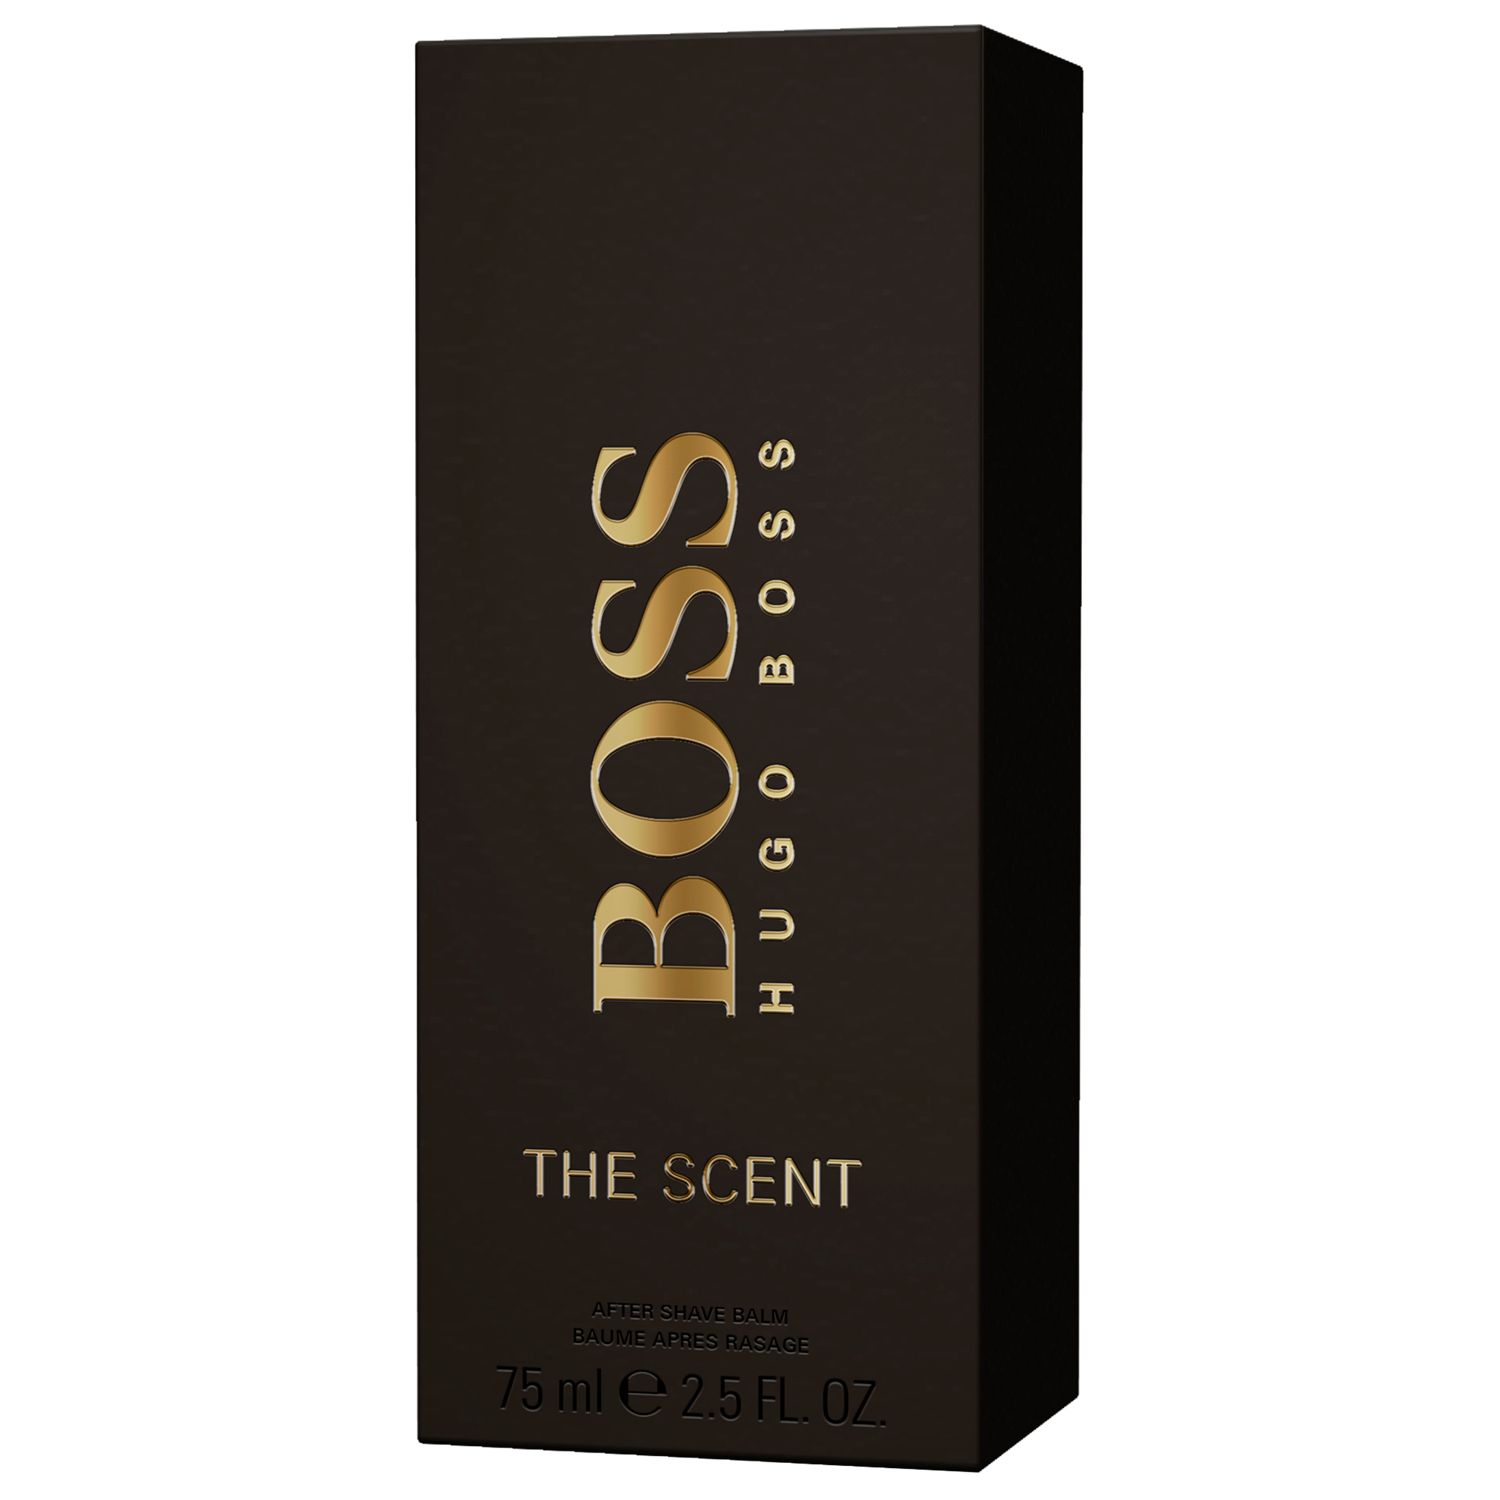 boss the scent after shave balm